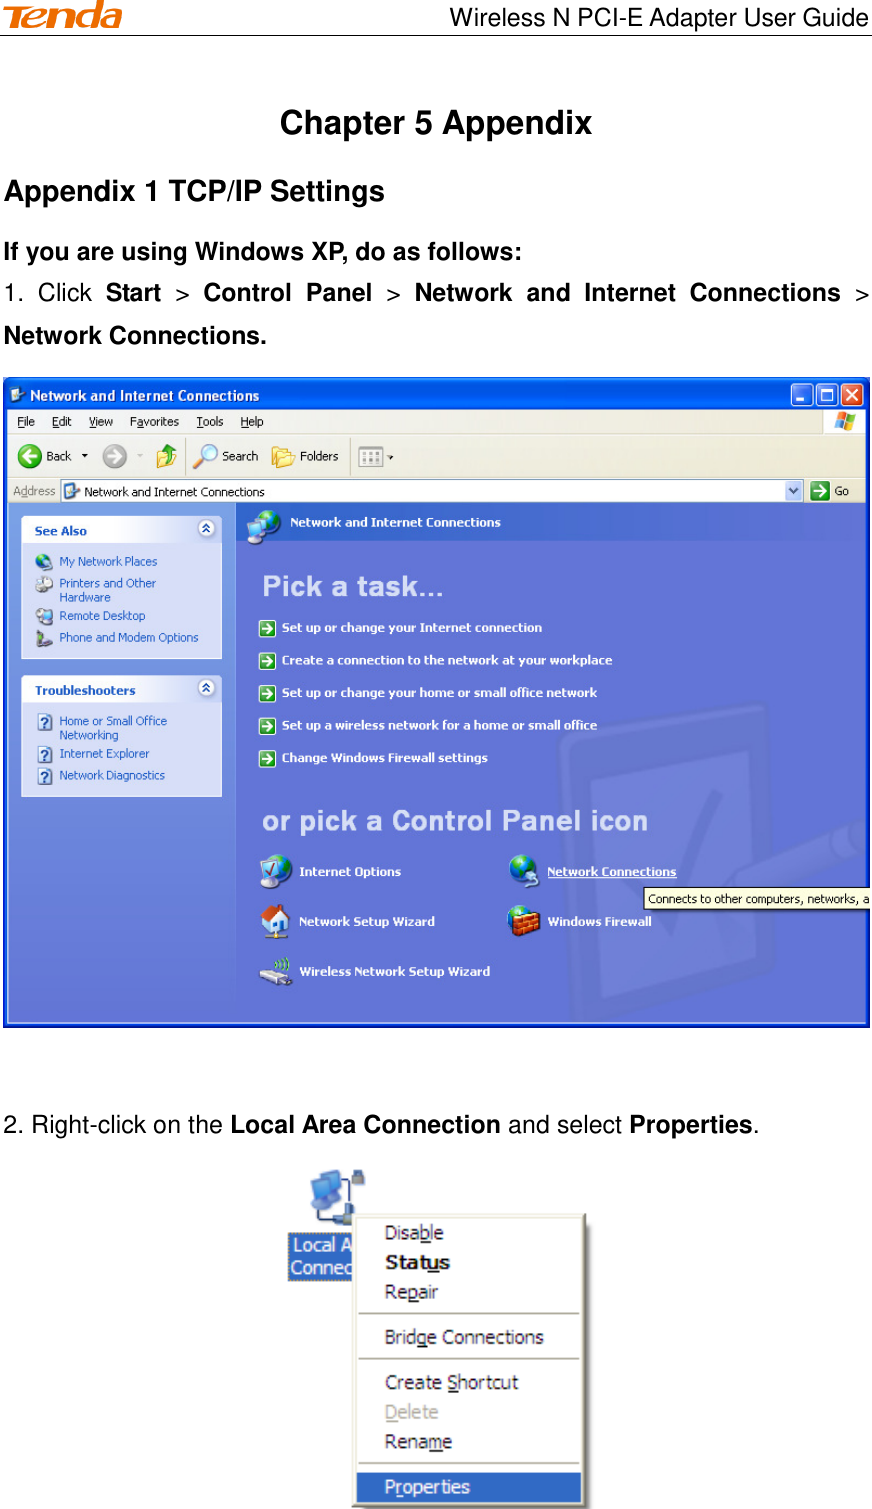                                    Wireless N PCI-E Adapter User Guide Chapter 5 Appendix Appendix 1 TCP/IP Settings If you are using Windows XP, do as follows: 1.  Click  Start &gt;  Control  Panel &gt;  Network  and  Internet  Connections &gt; Network Connections.   2. Right-click on the Local Area Connection and select Properties.  